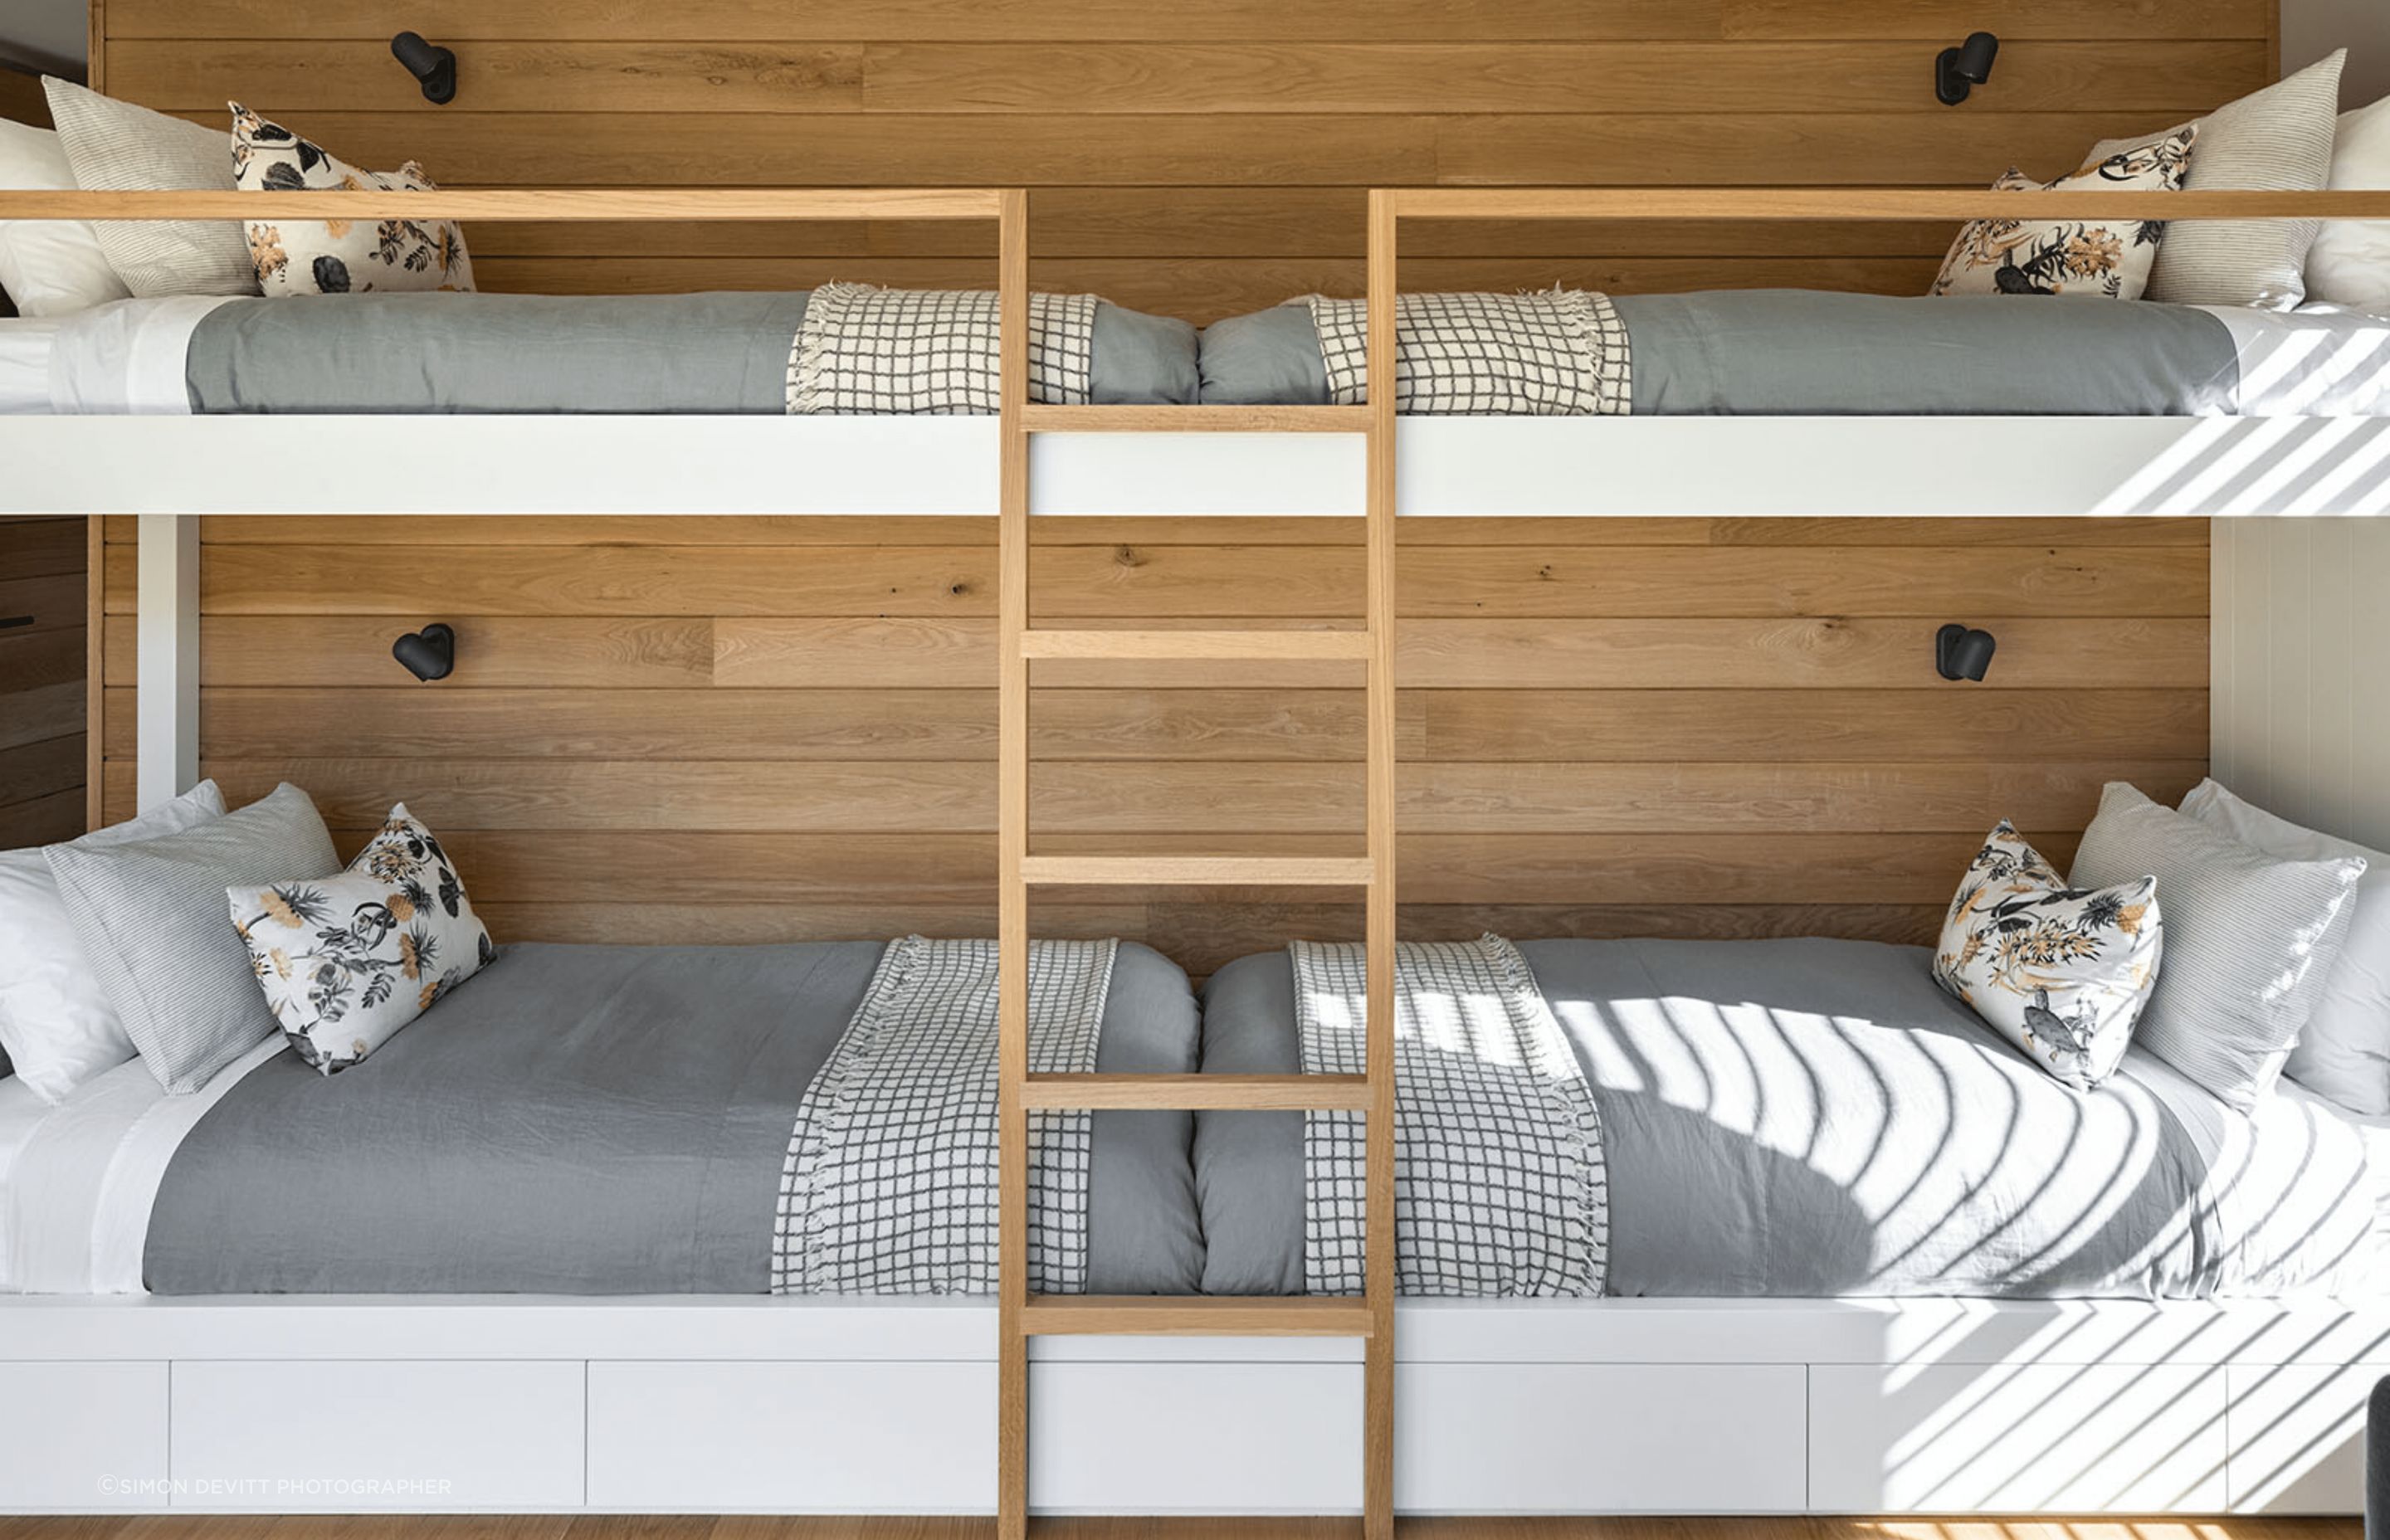 The bunkroom for the grandkids contains custom bunks and one of the best views in the whole house.